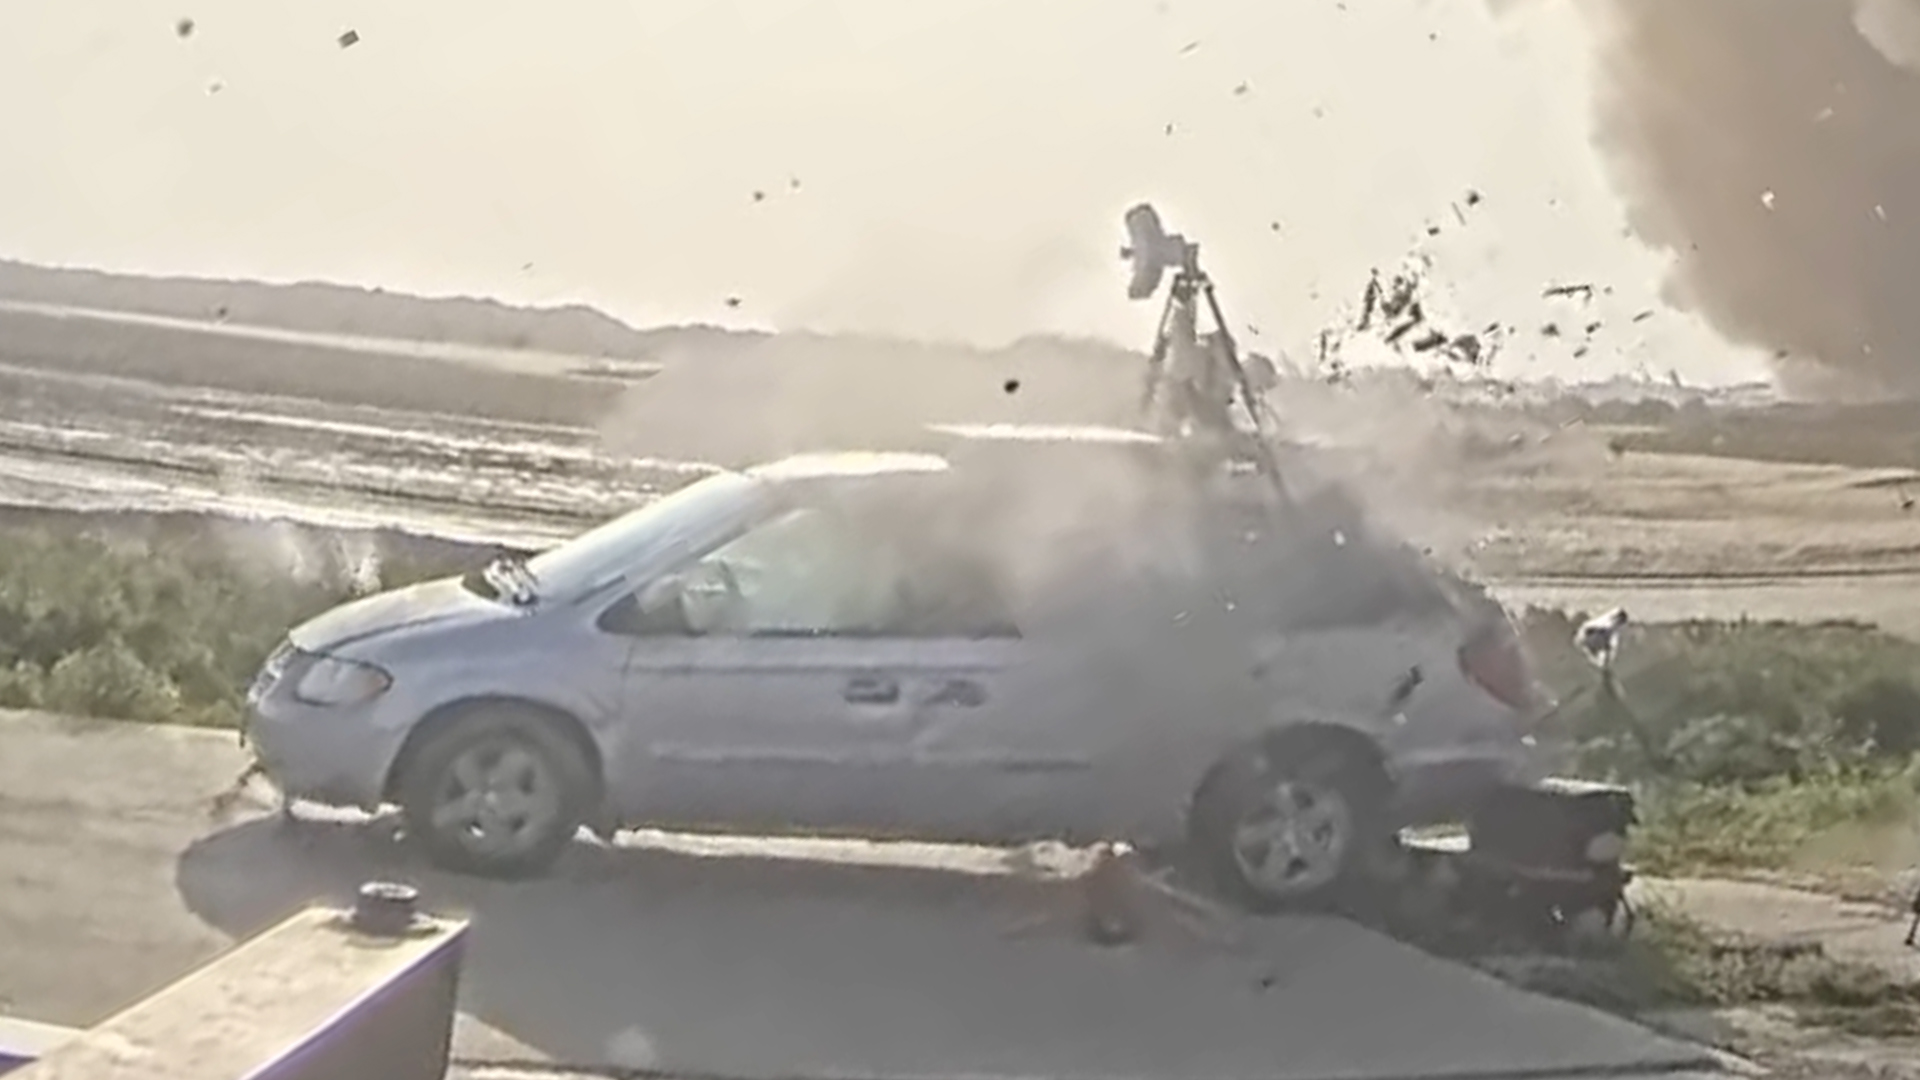 Watch SpaceX Starship Annihilate a Dodge Caravan With Flying Debris